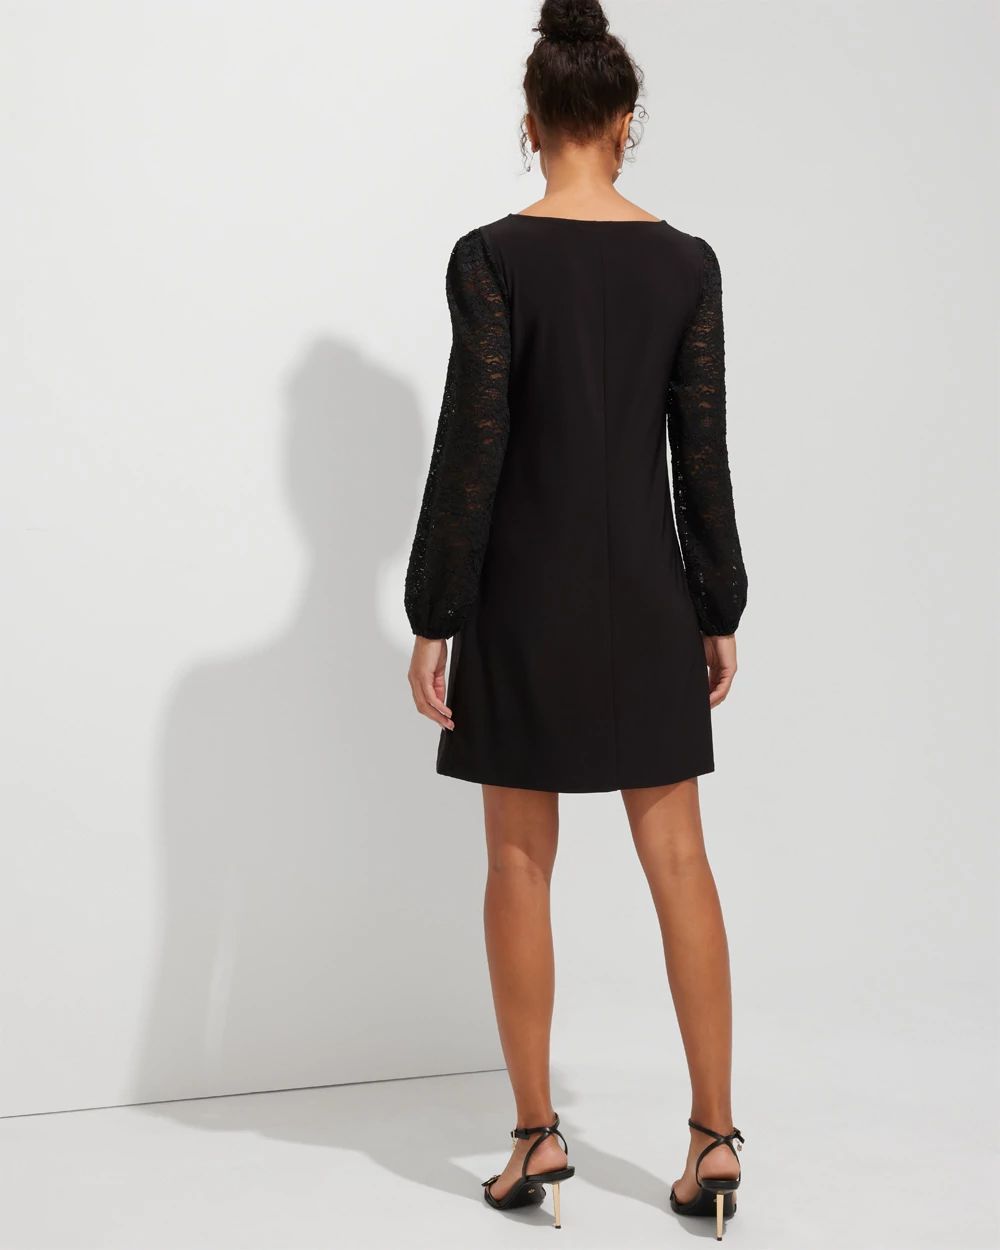 Outlet WHBM Lace Sleeve Mini Dress